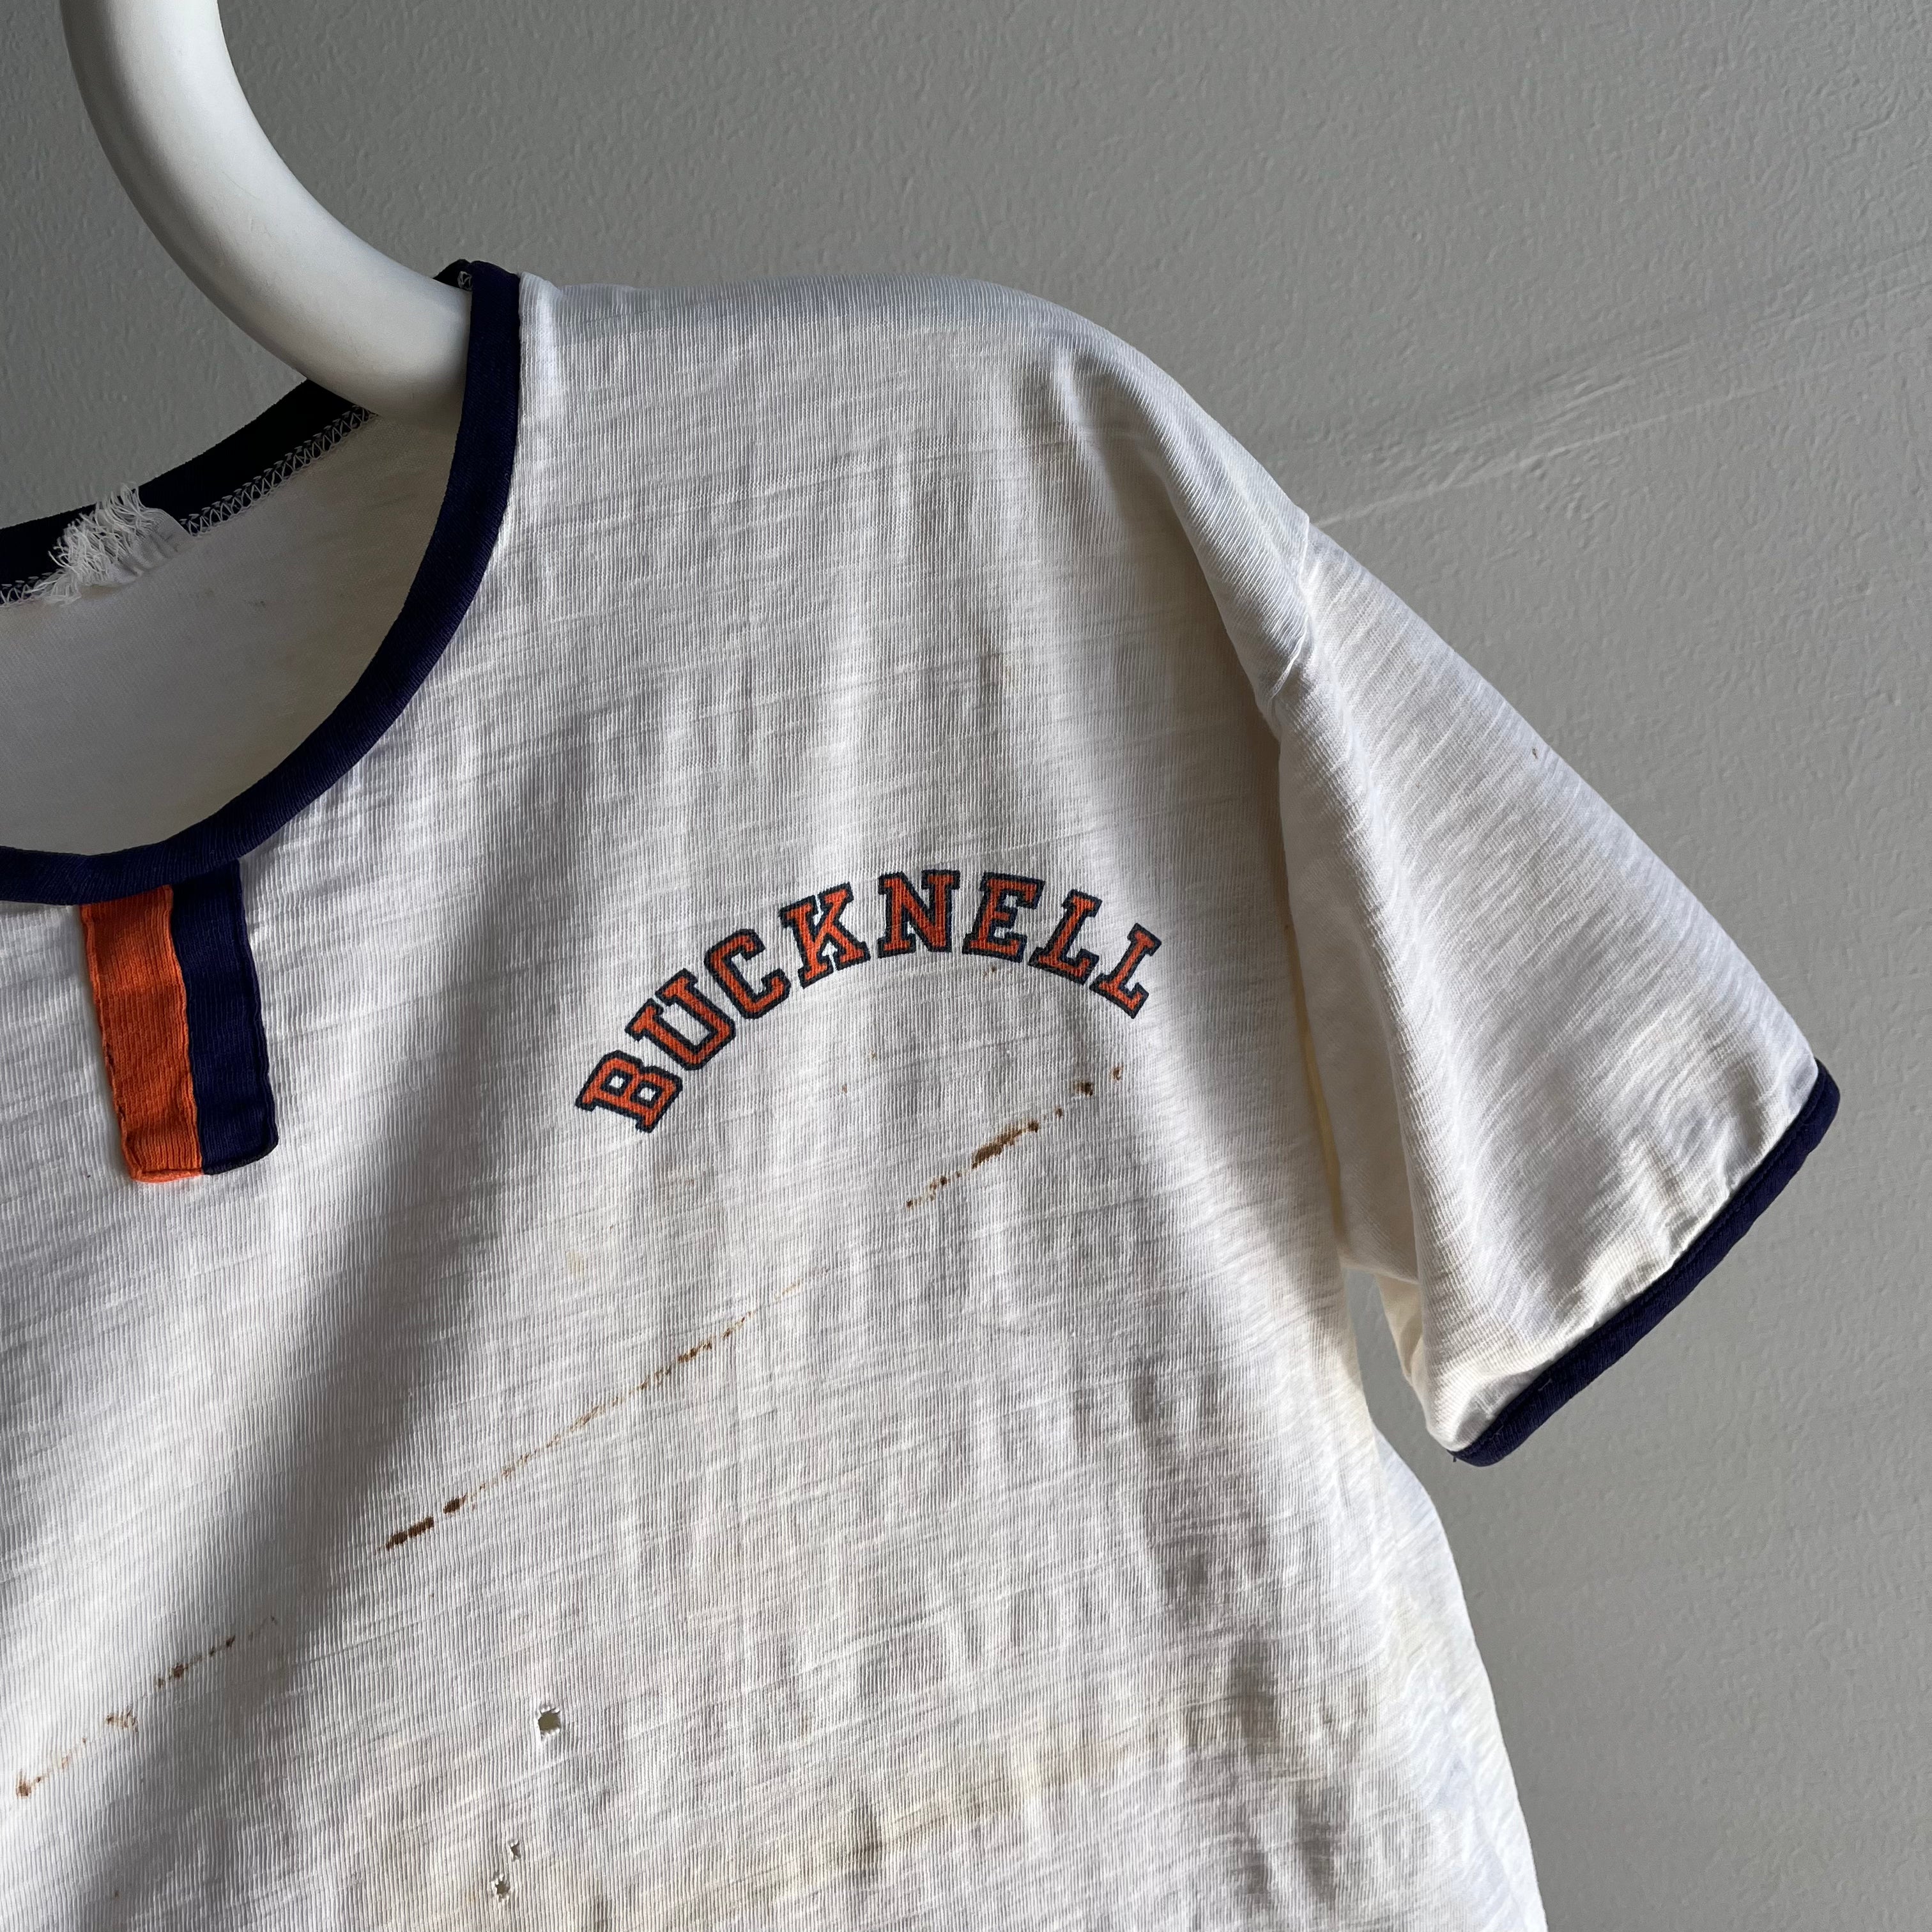 1960/1970s Bucknell Rad(ly) Stained Cotton Ring T-Shirt - CE